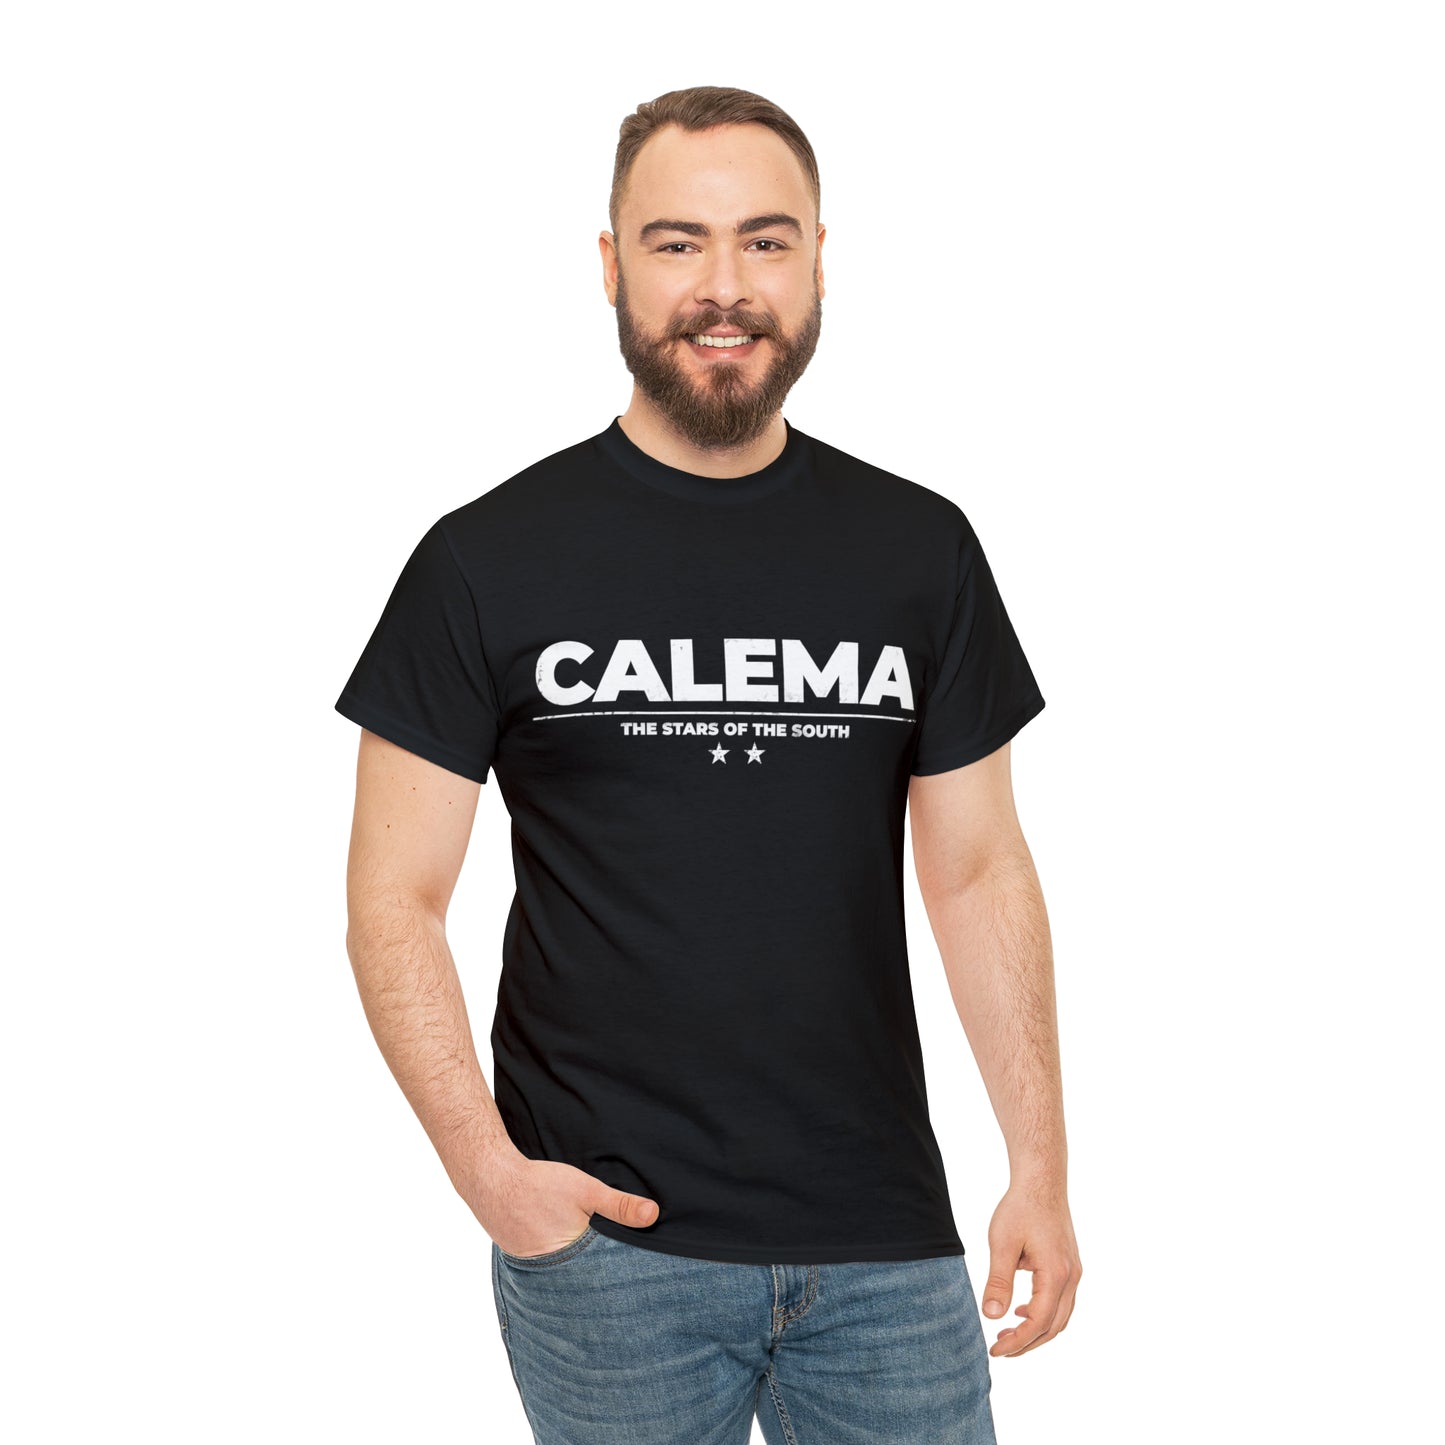 Calema - The Stars of the South